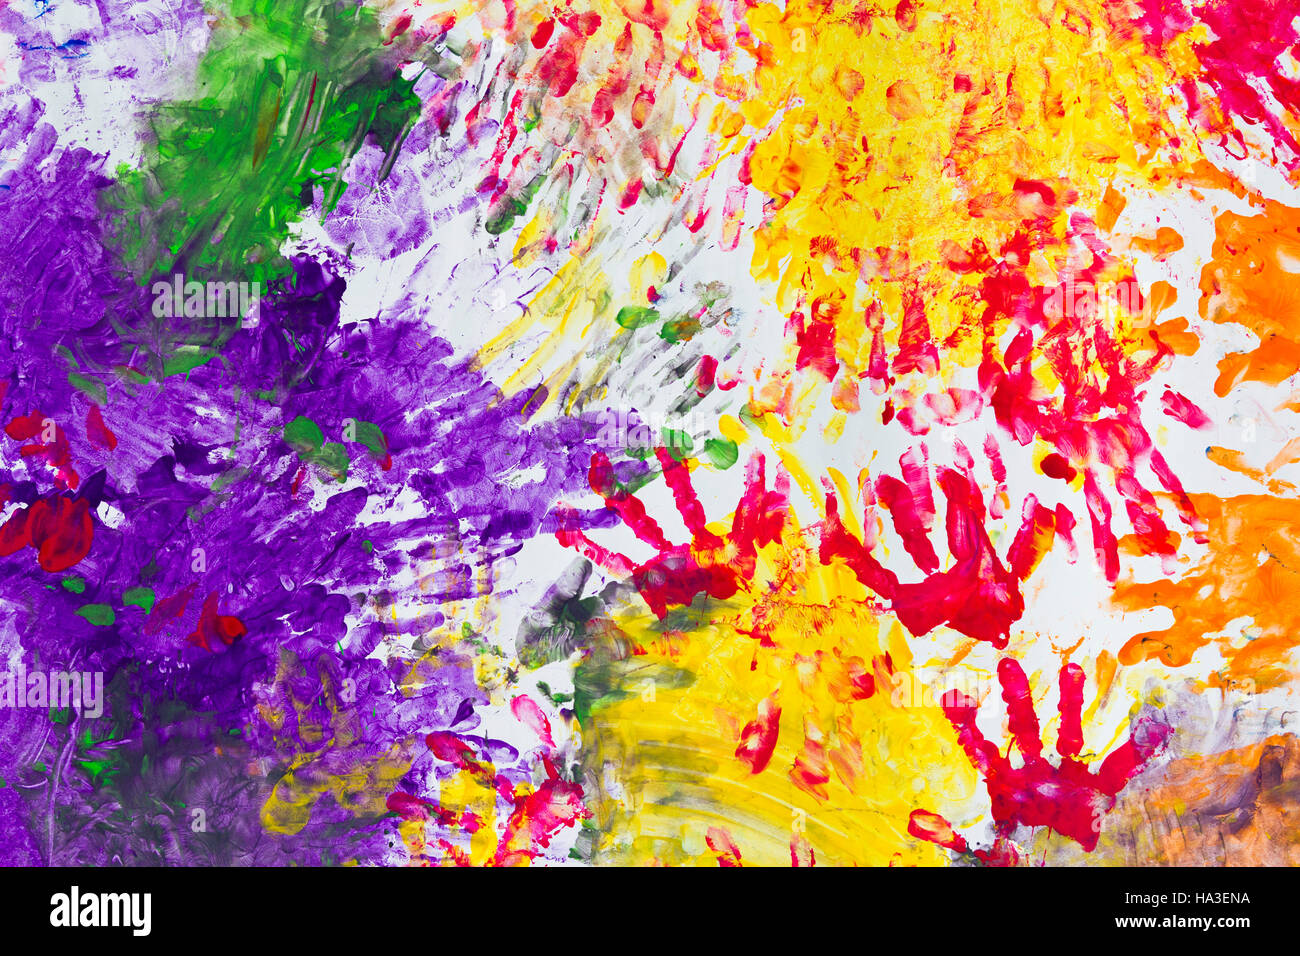 Colourful childrens' hand painting Stock Photo